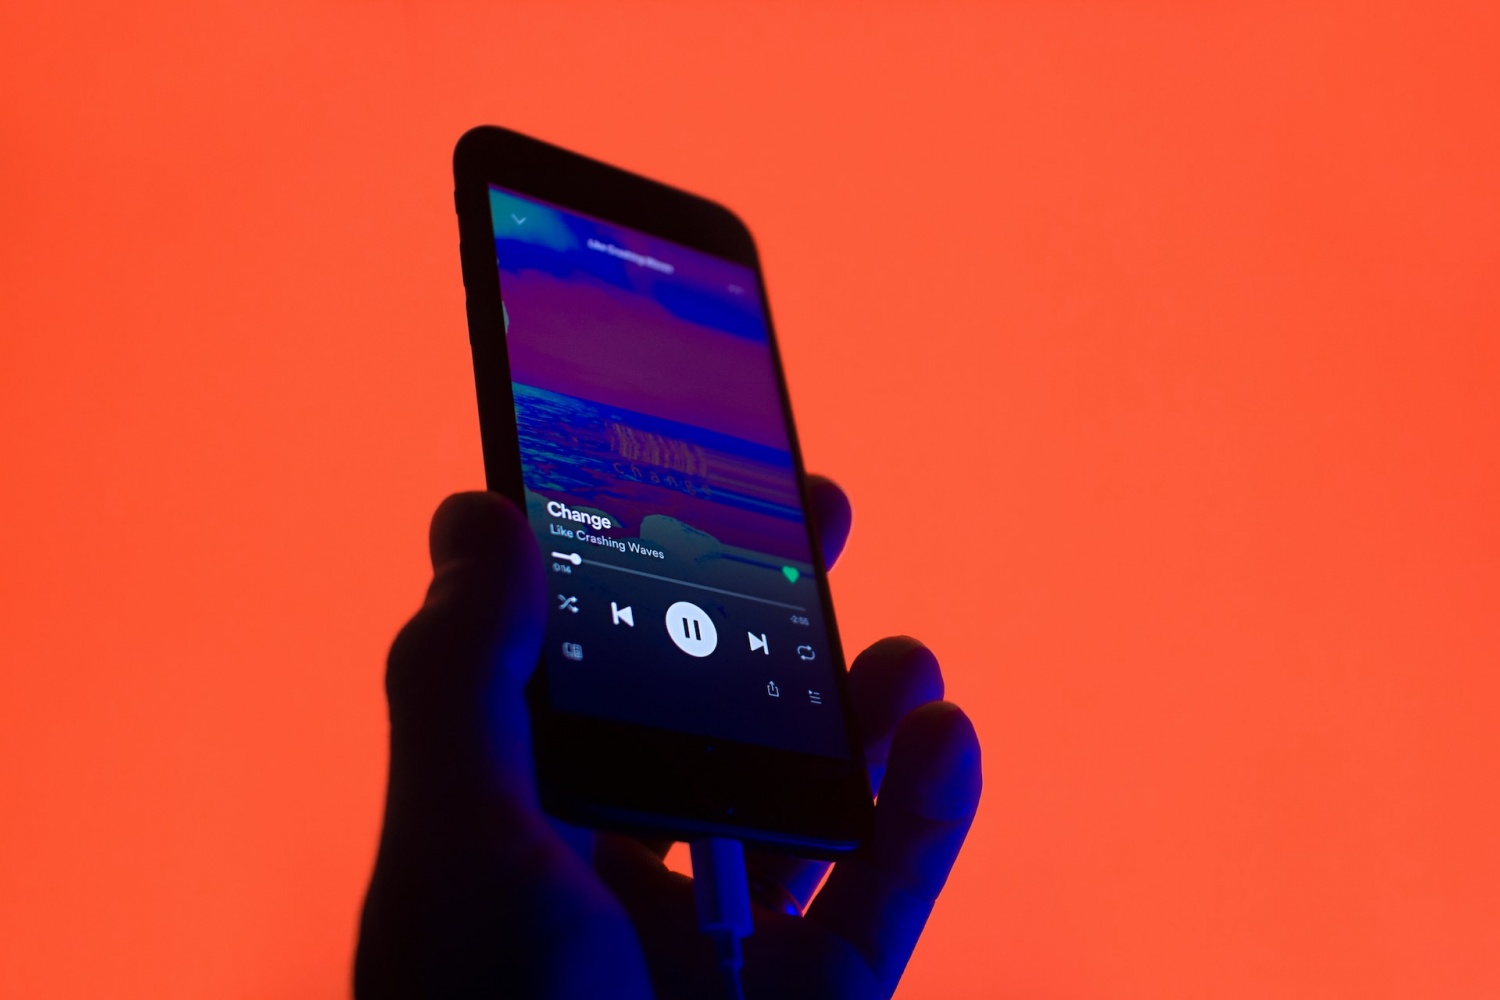 Streaming Giant Spotify to Launch its Version of 'Smart Downloads' Similar to YouTube Music